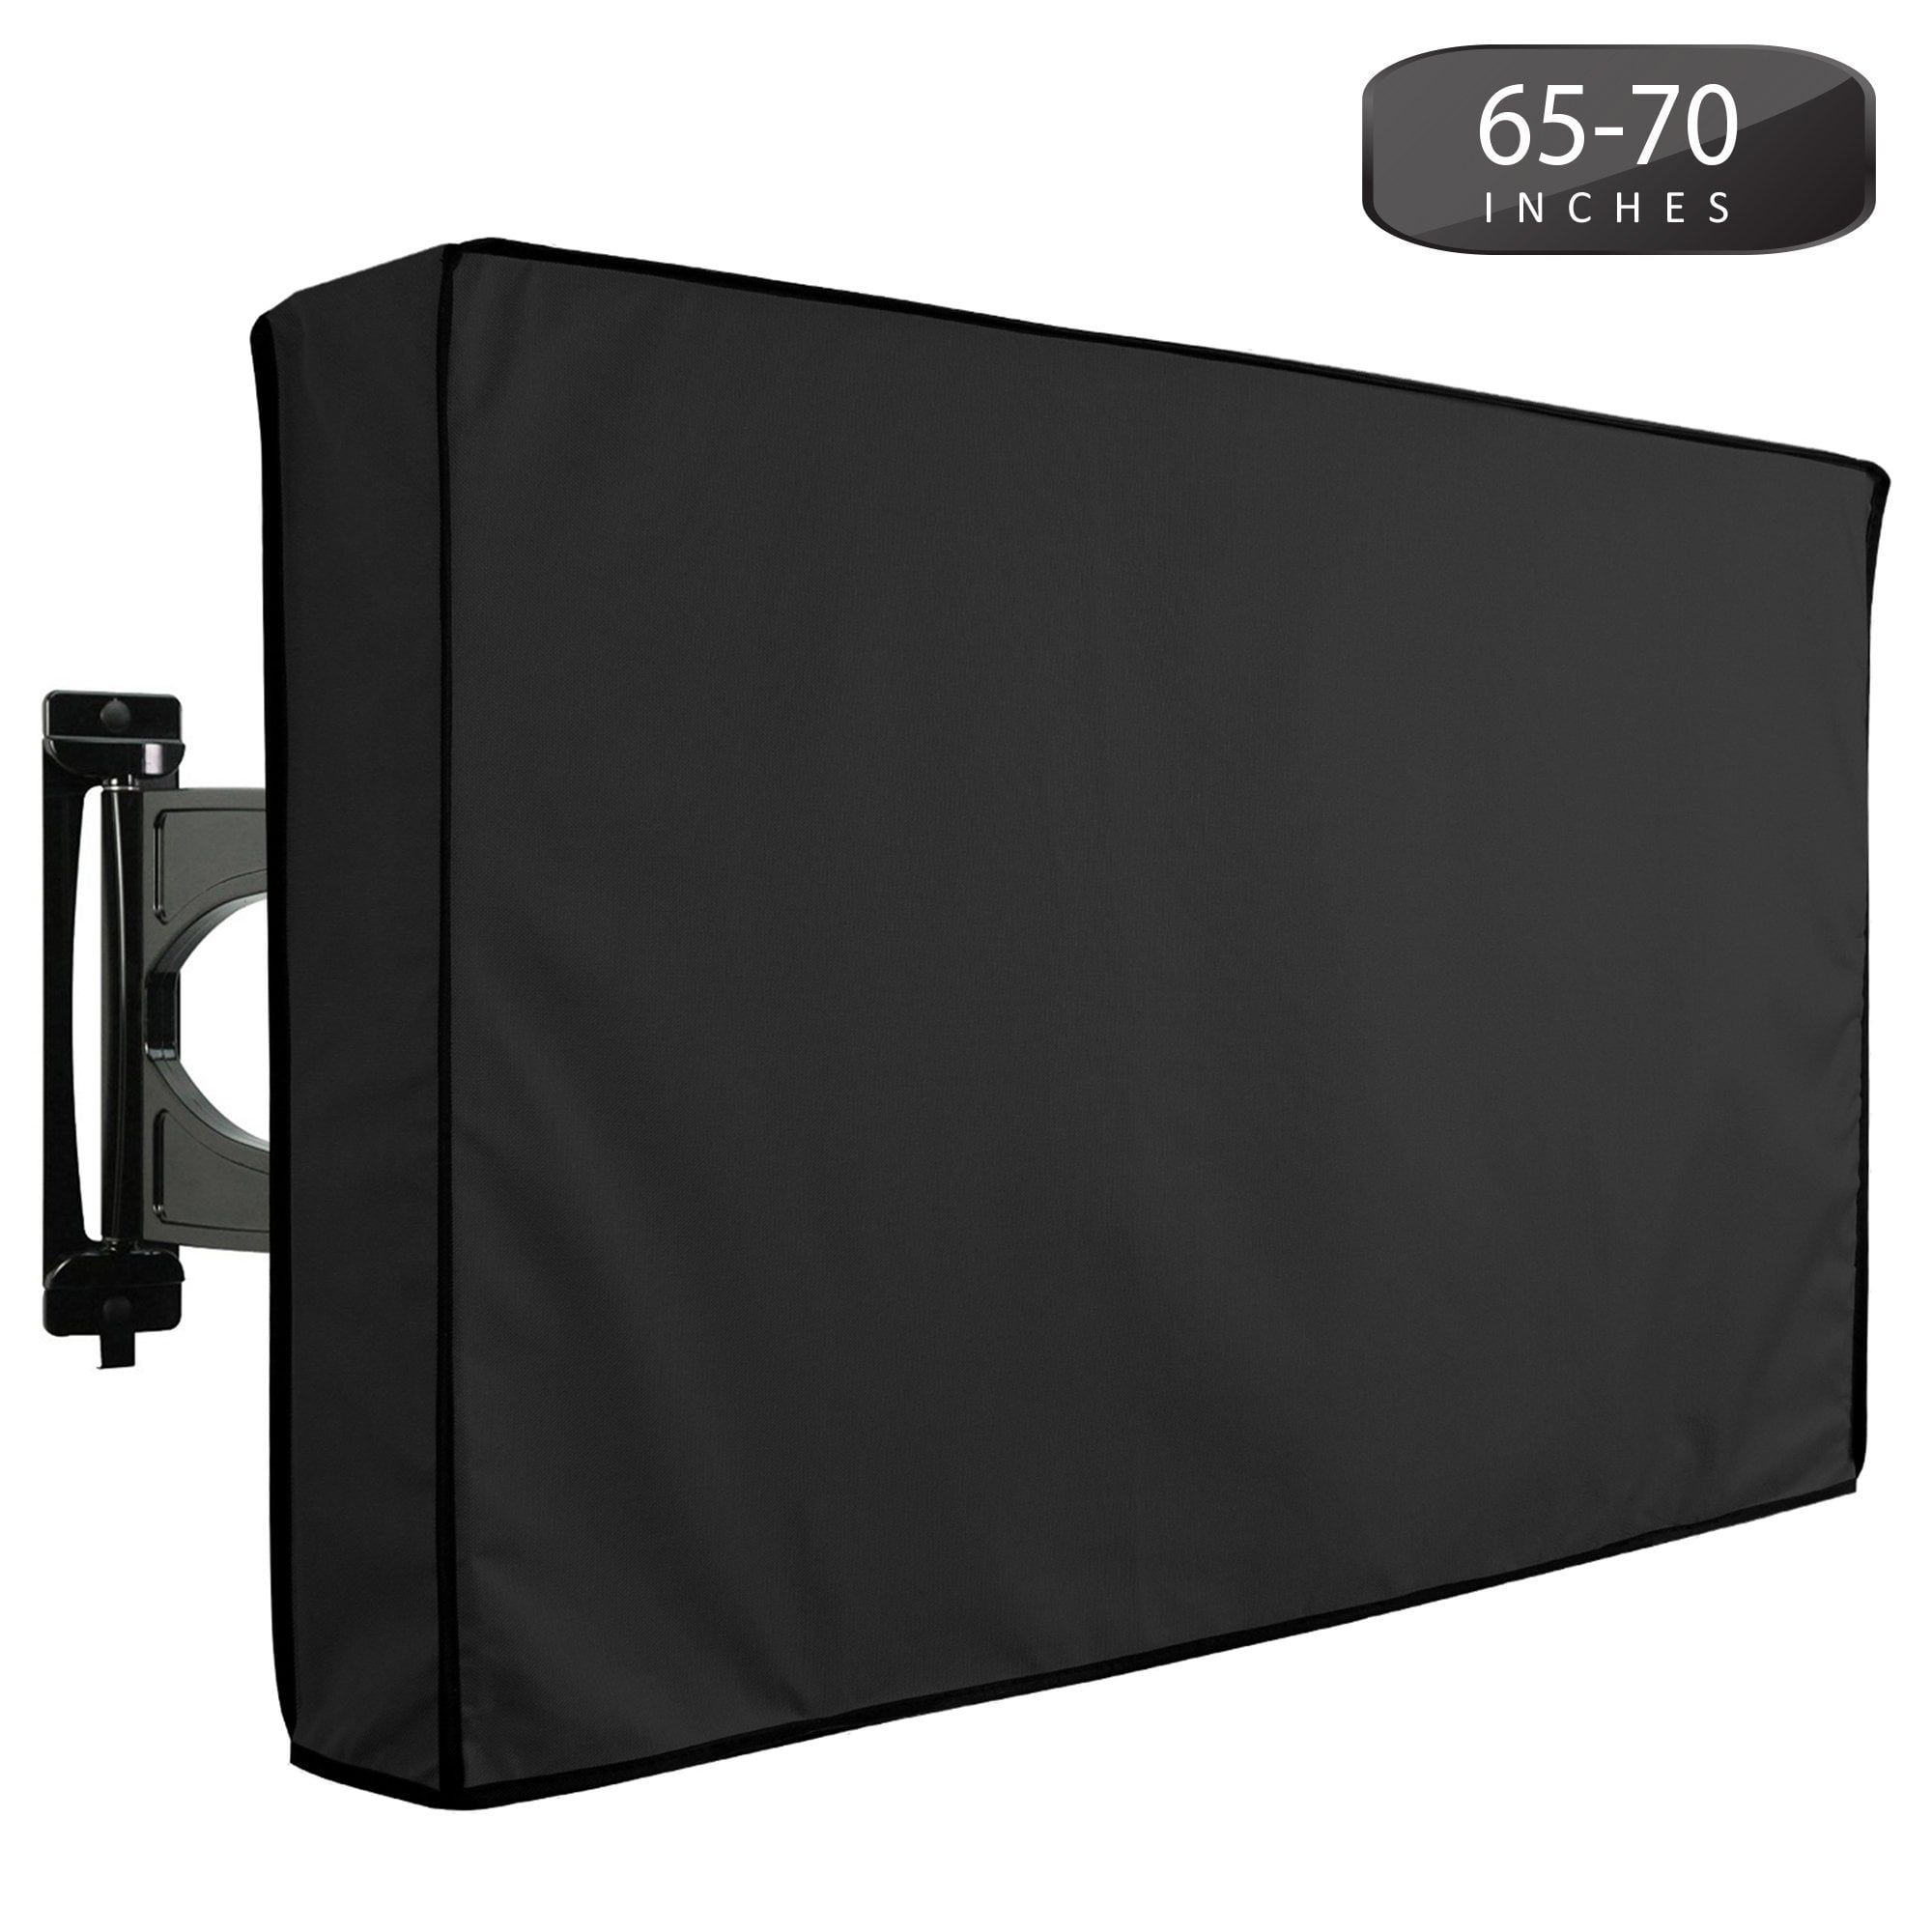 55 Outdoor TV Cover *Top Premium Quality* Weather Resistant* Soft Non Scratch Interior* Made in USA* Televisions up to 60